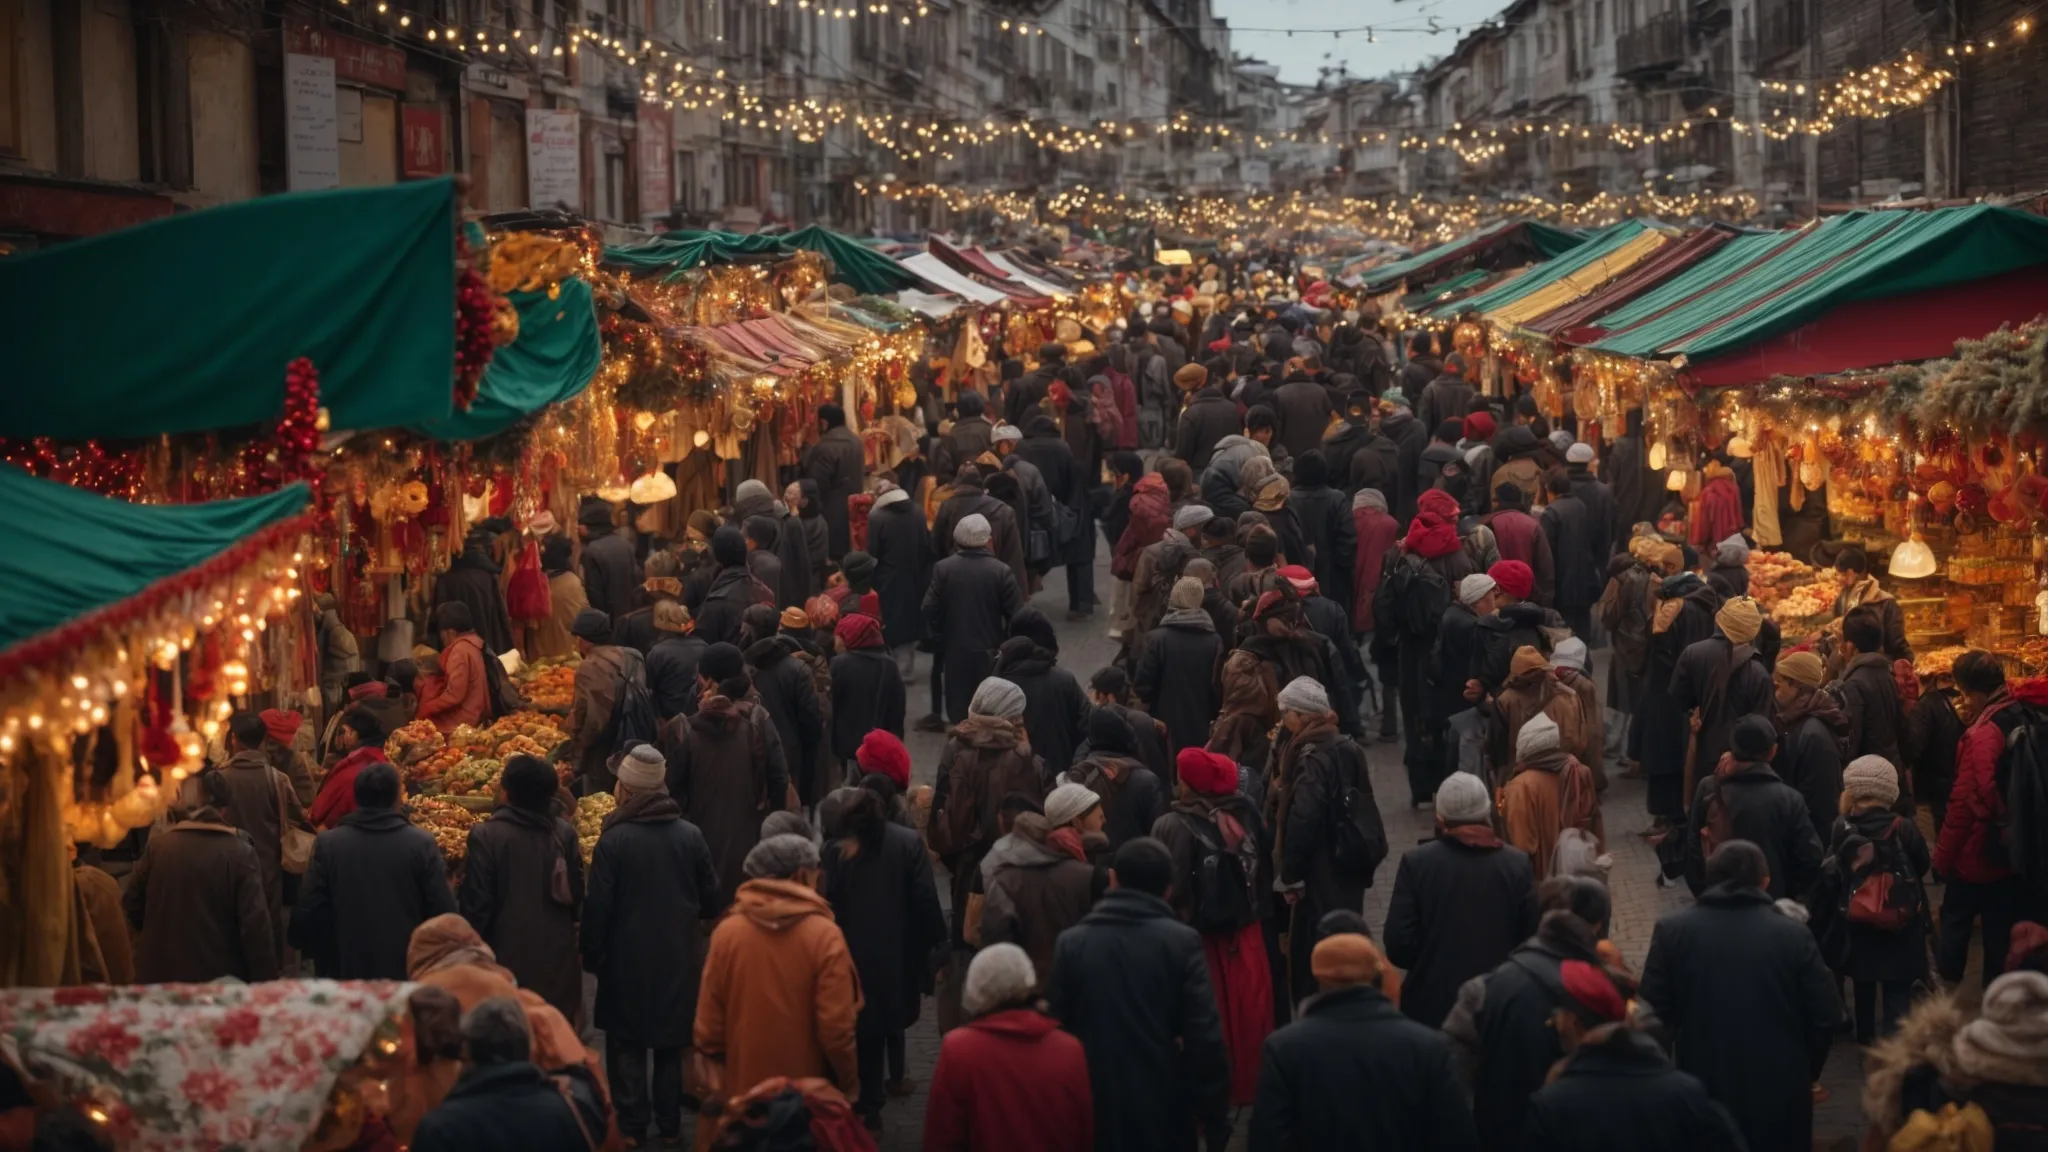 a crowded festive market with vibrant decorations and people shopping happily.